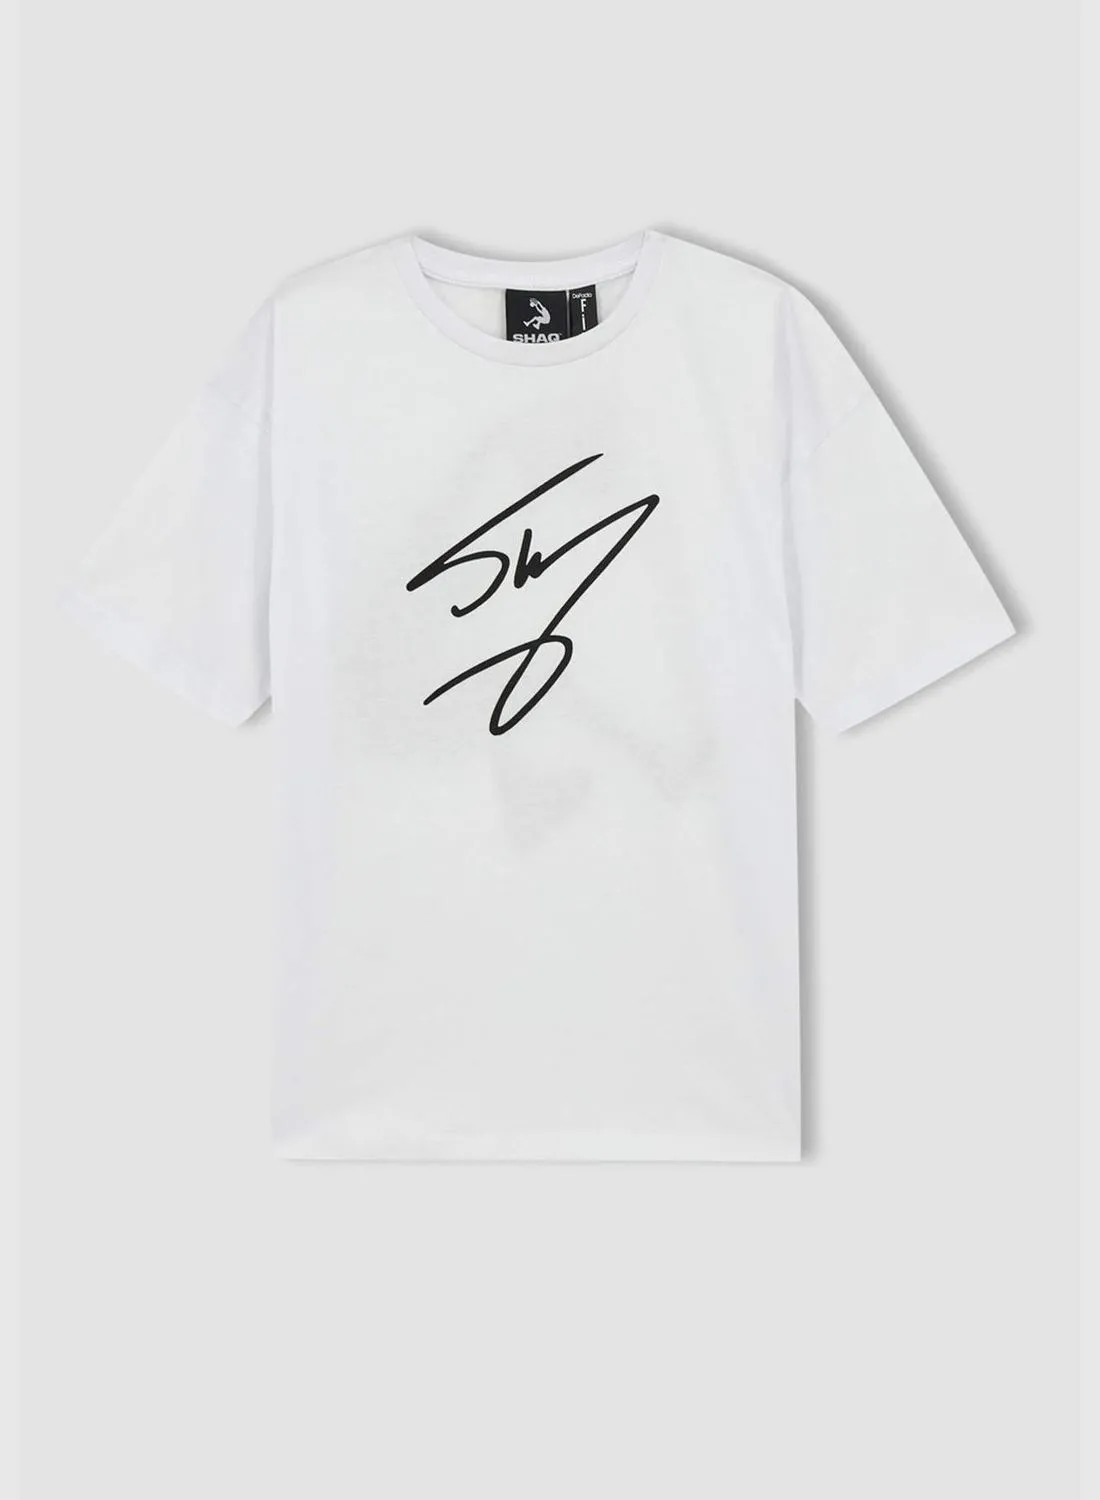 DeFacto Oversized Crew Neck Short Sleeve Shaquille O'Neal Printed T-Shirt